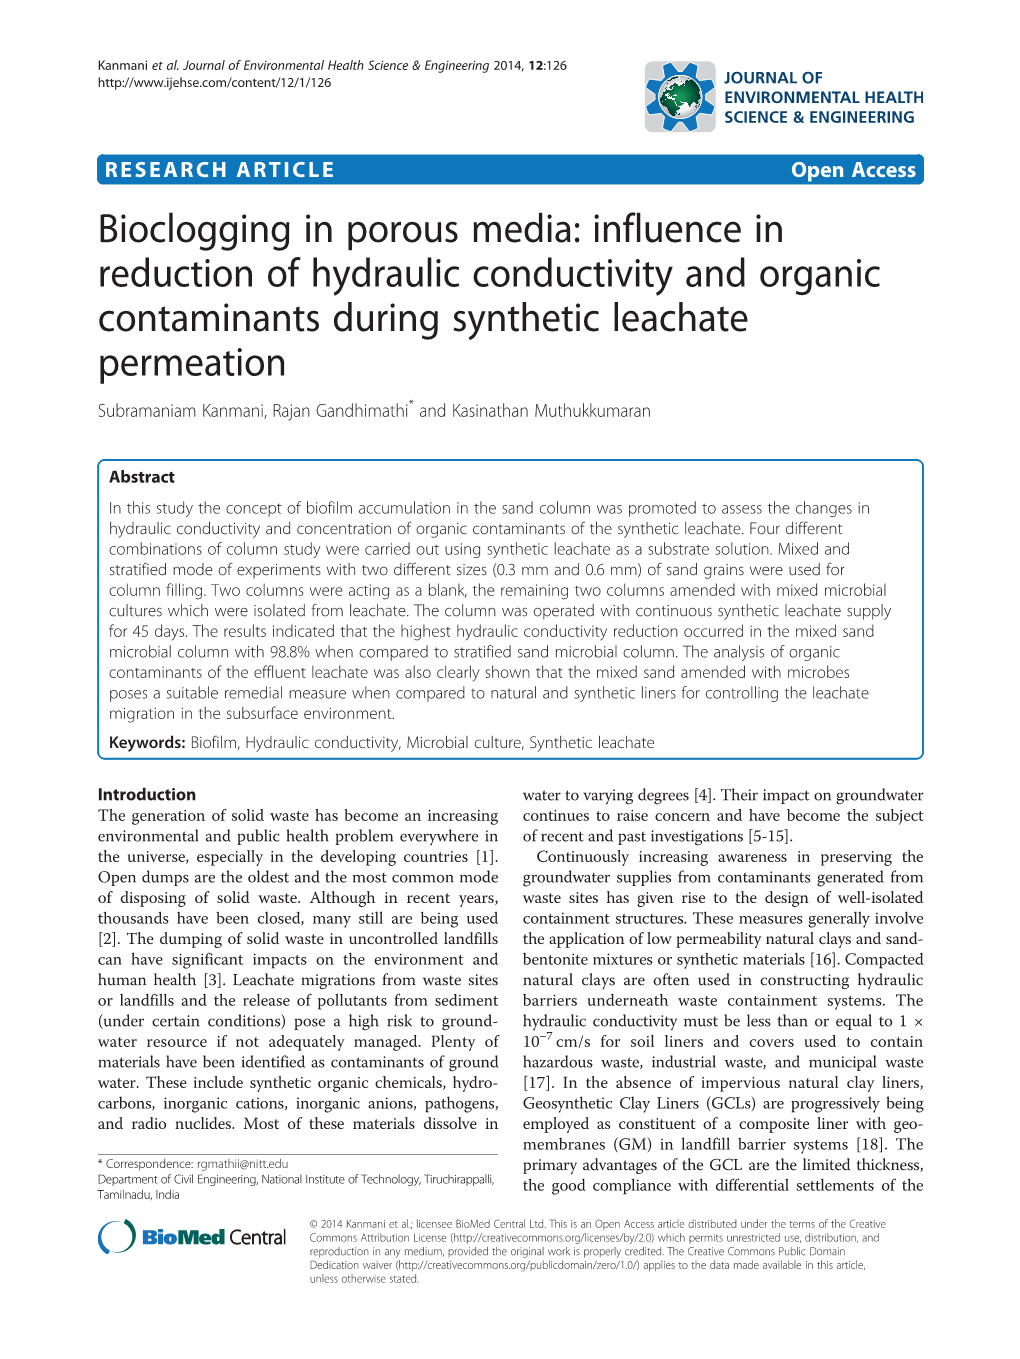 Bioclogging in Porous Media: Influence in Reduction of Hydraulic